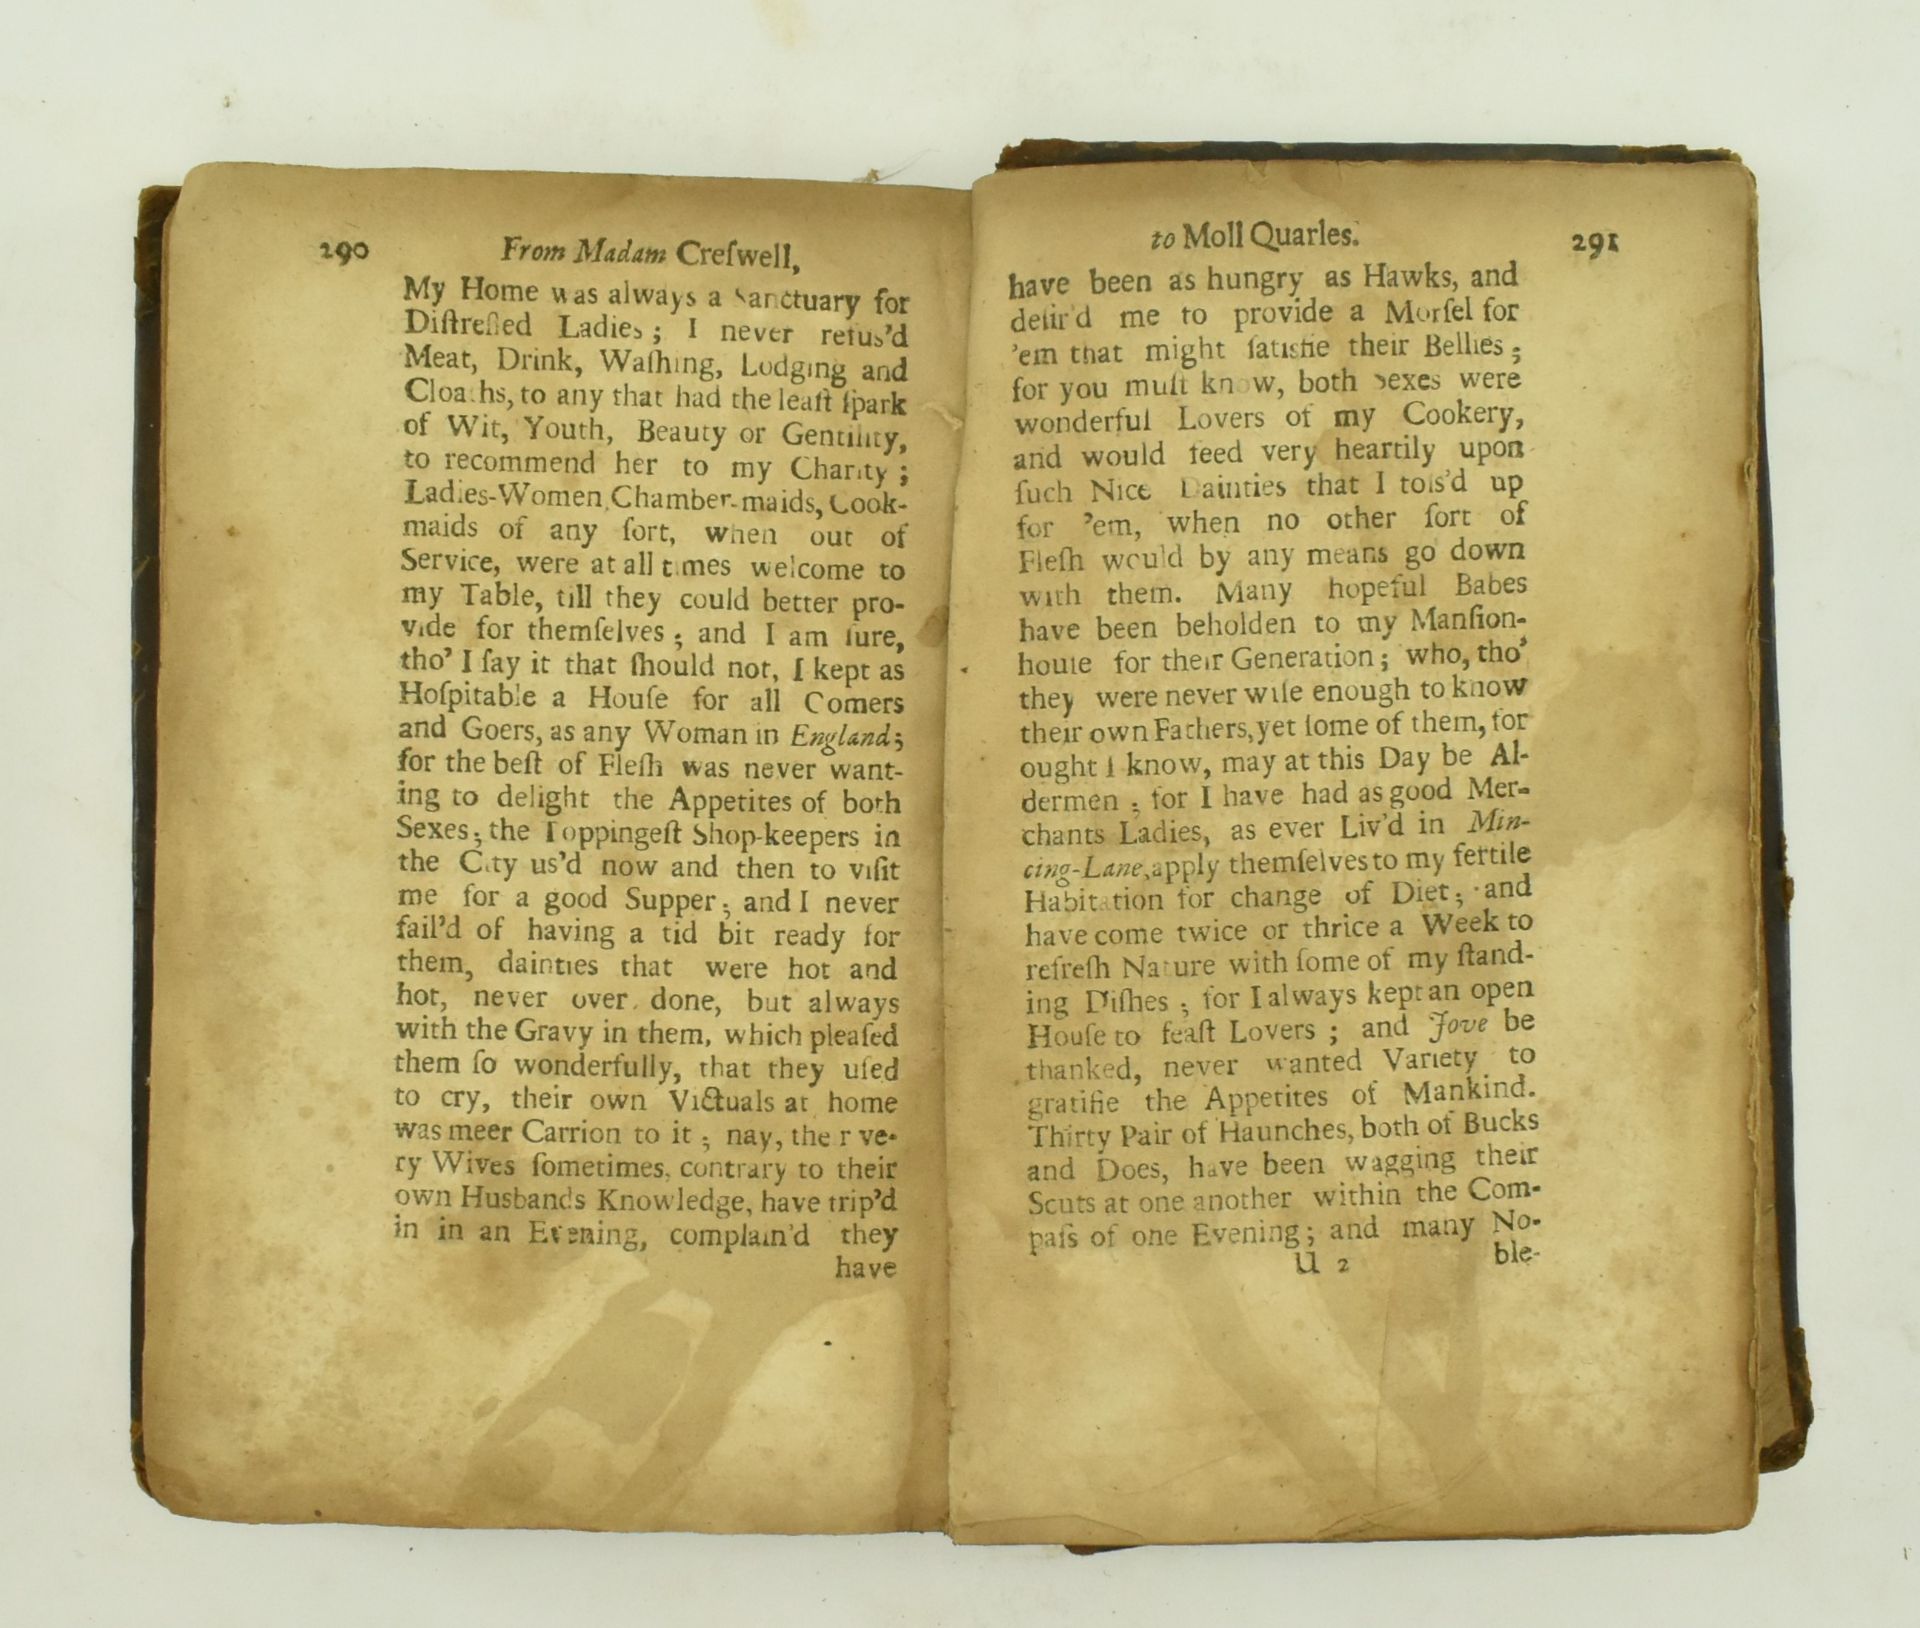 1703 A CONTINUATION OF THE LETTERS FROM THE DEAD TO THE LIVING - Image 6 of 7